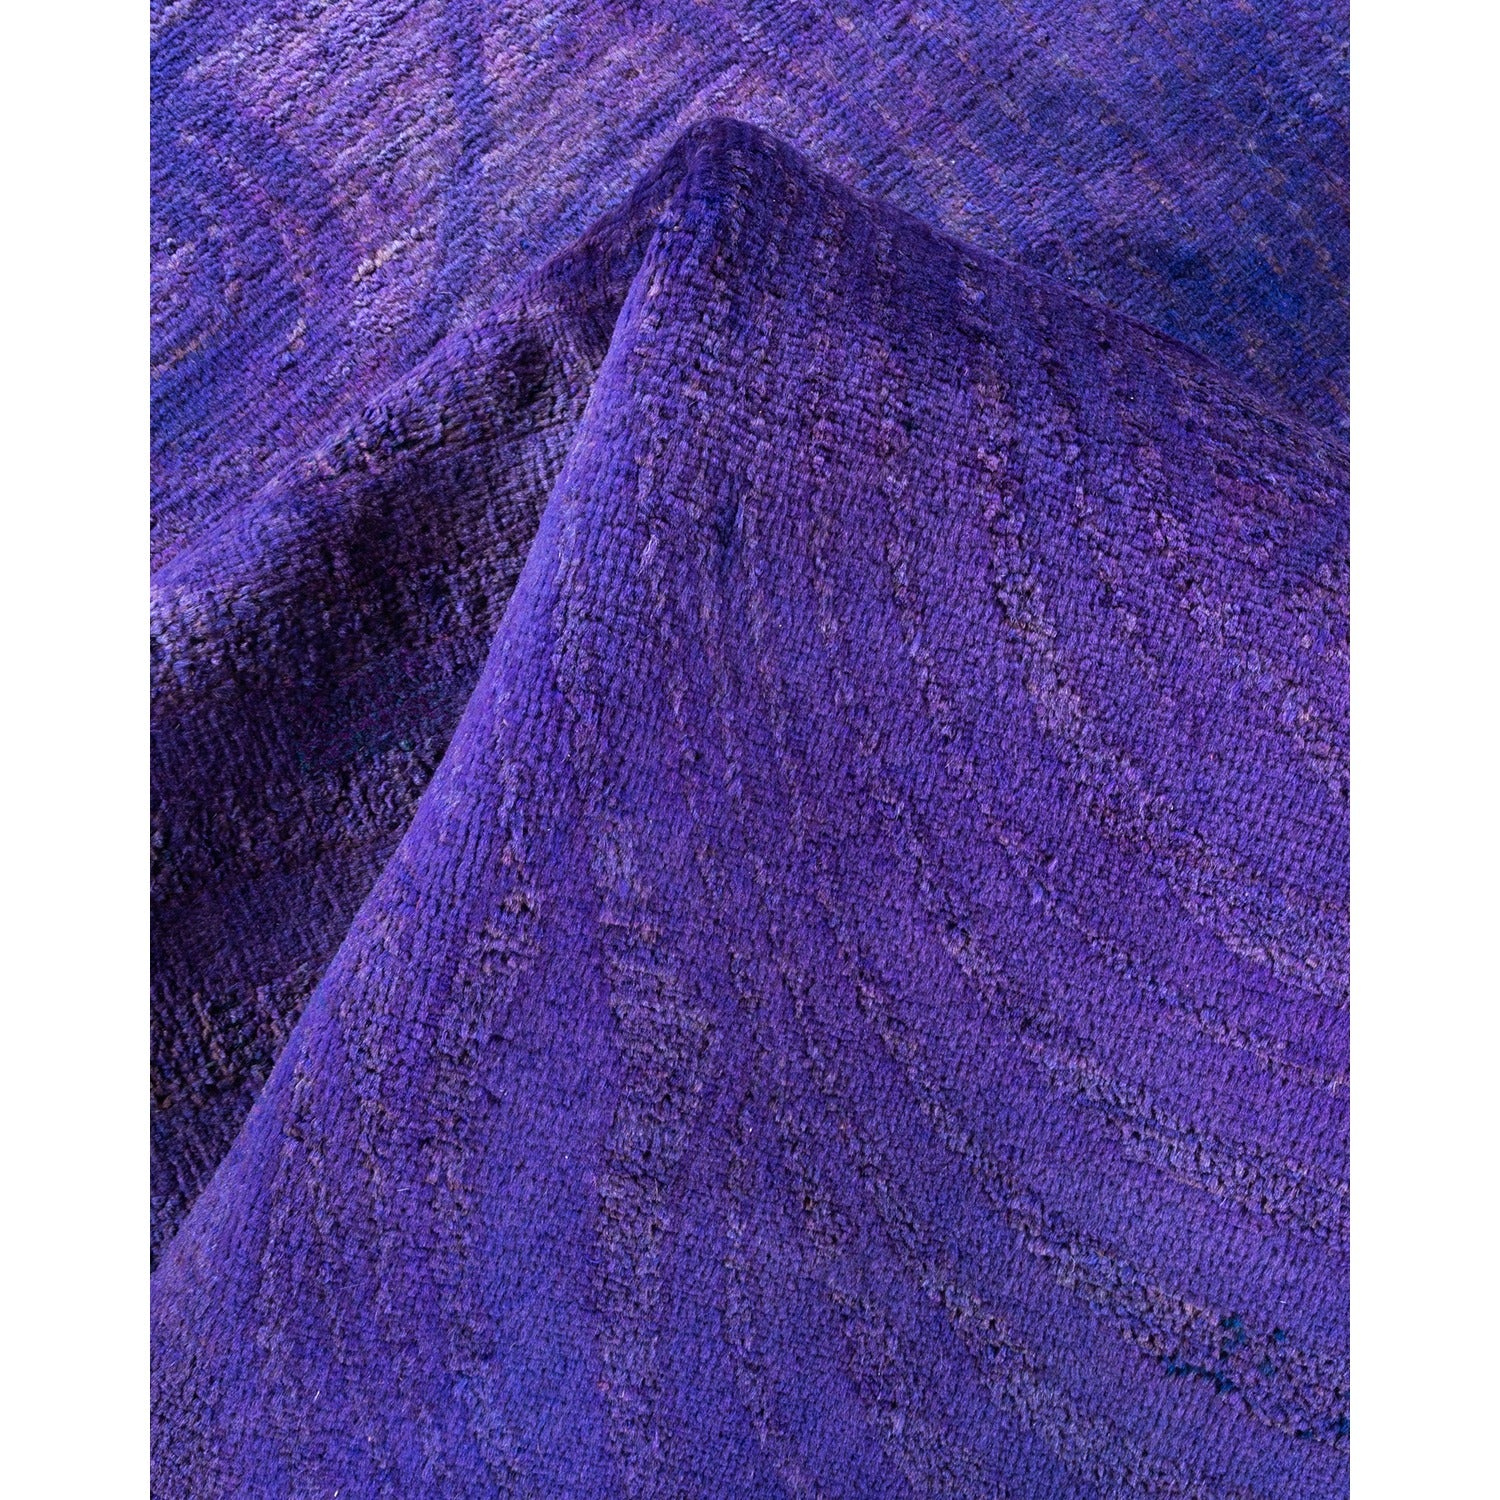 Close-up of textured purple fabric folds, showcasing depth and dimension.